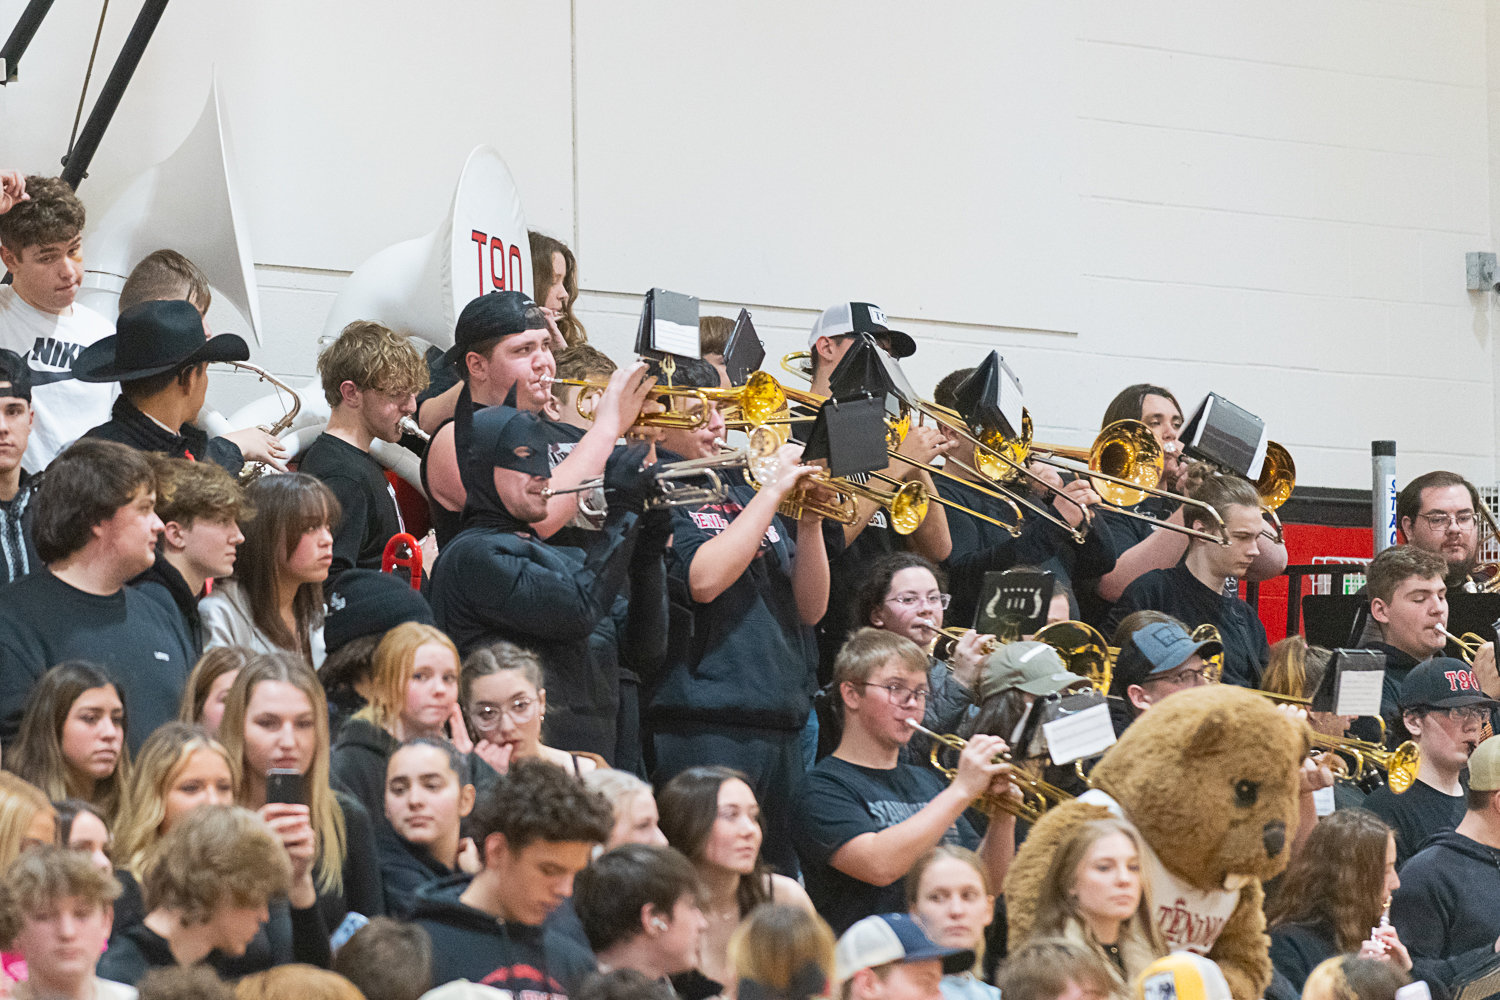 Batman takes the melodic lead for the Tenino band during the Beavers' 47-33 loss to Hoquiam on Jan. 24.